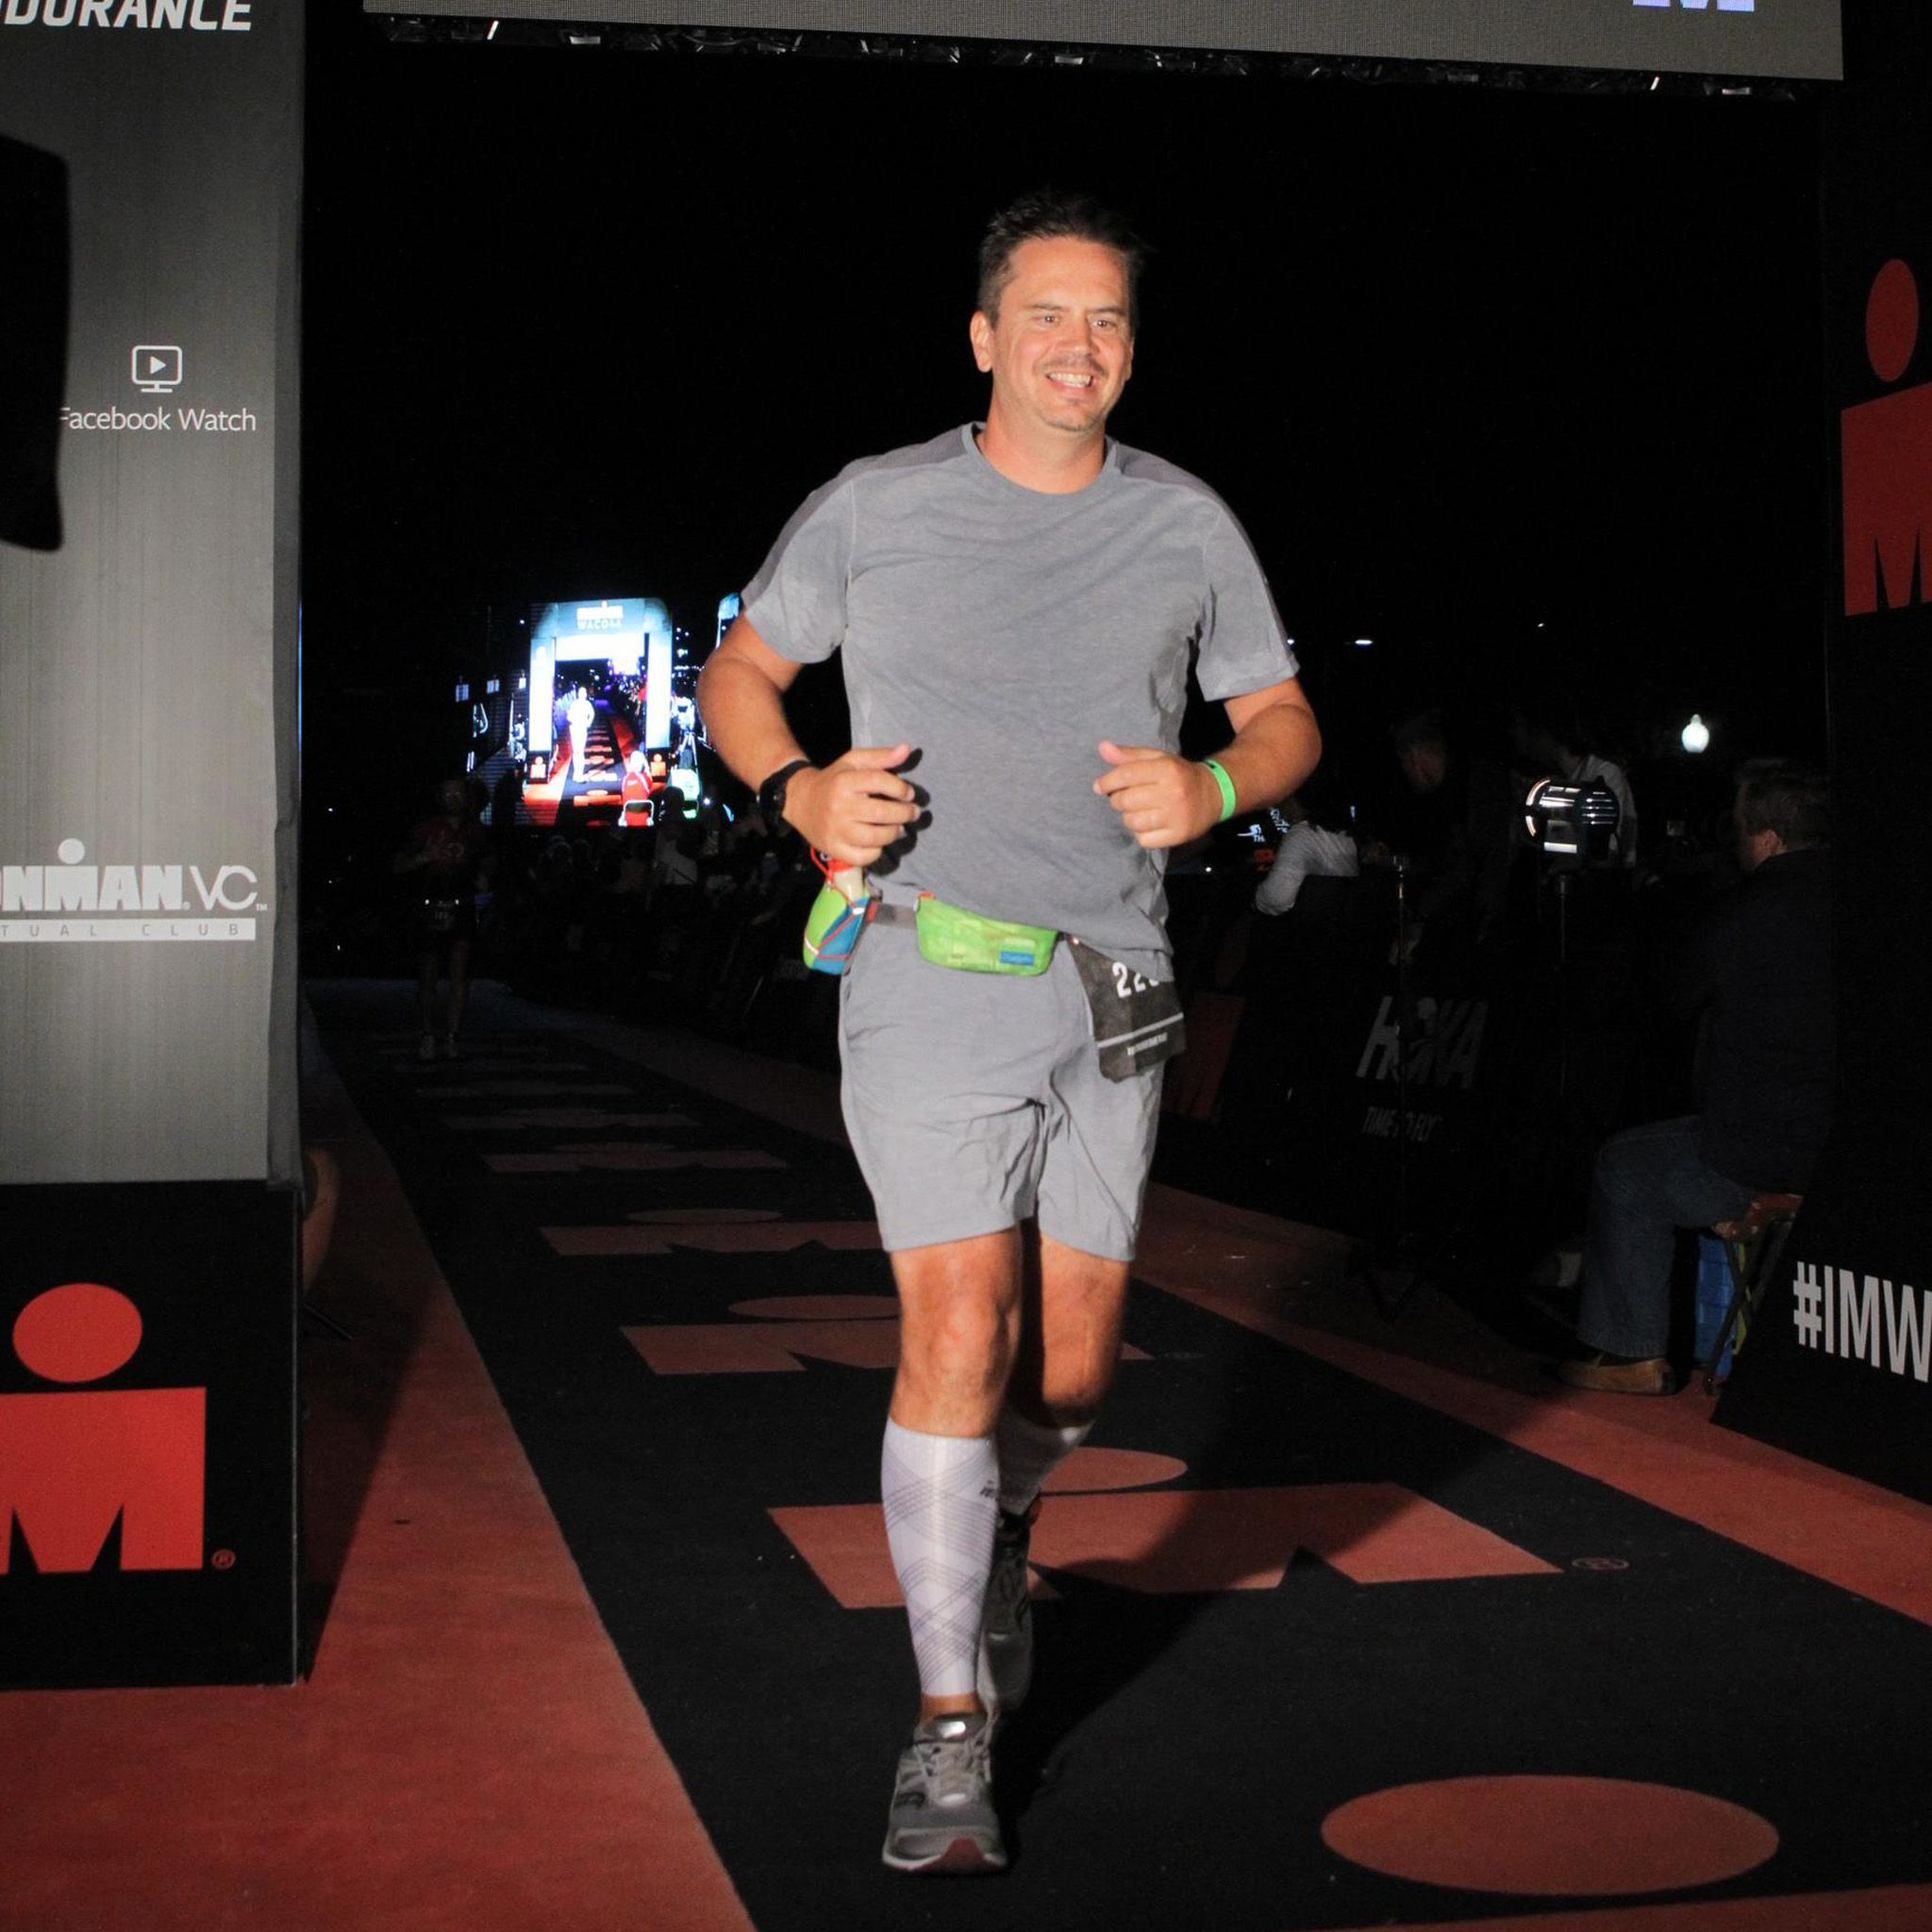 This Man Lost 55 Pounds and Went From Sedentary to Multi-Time Ironman Finisher